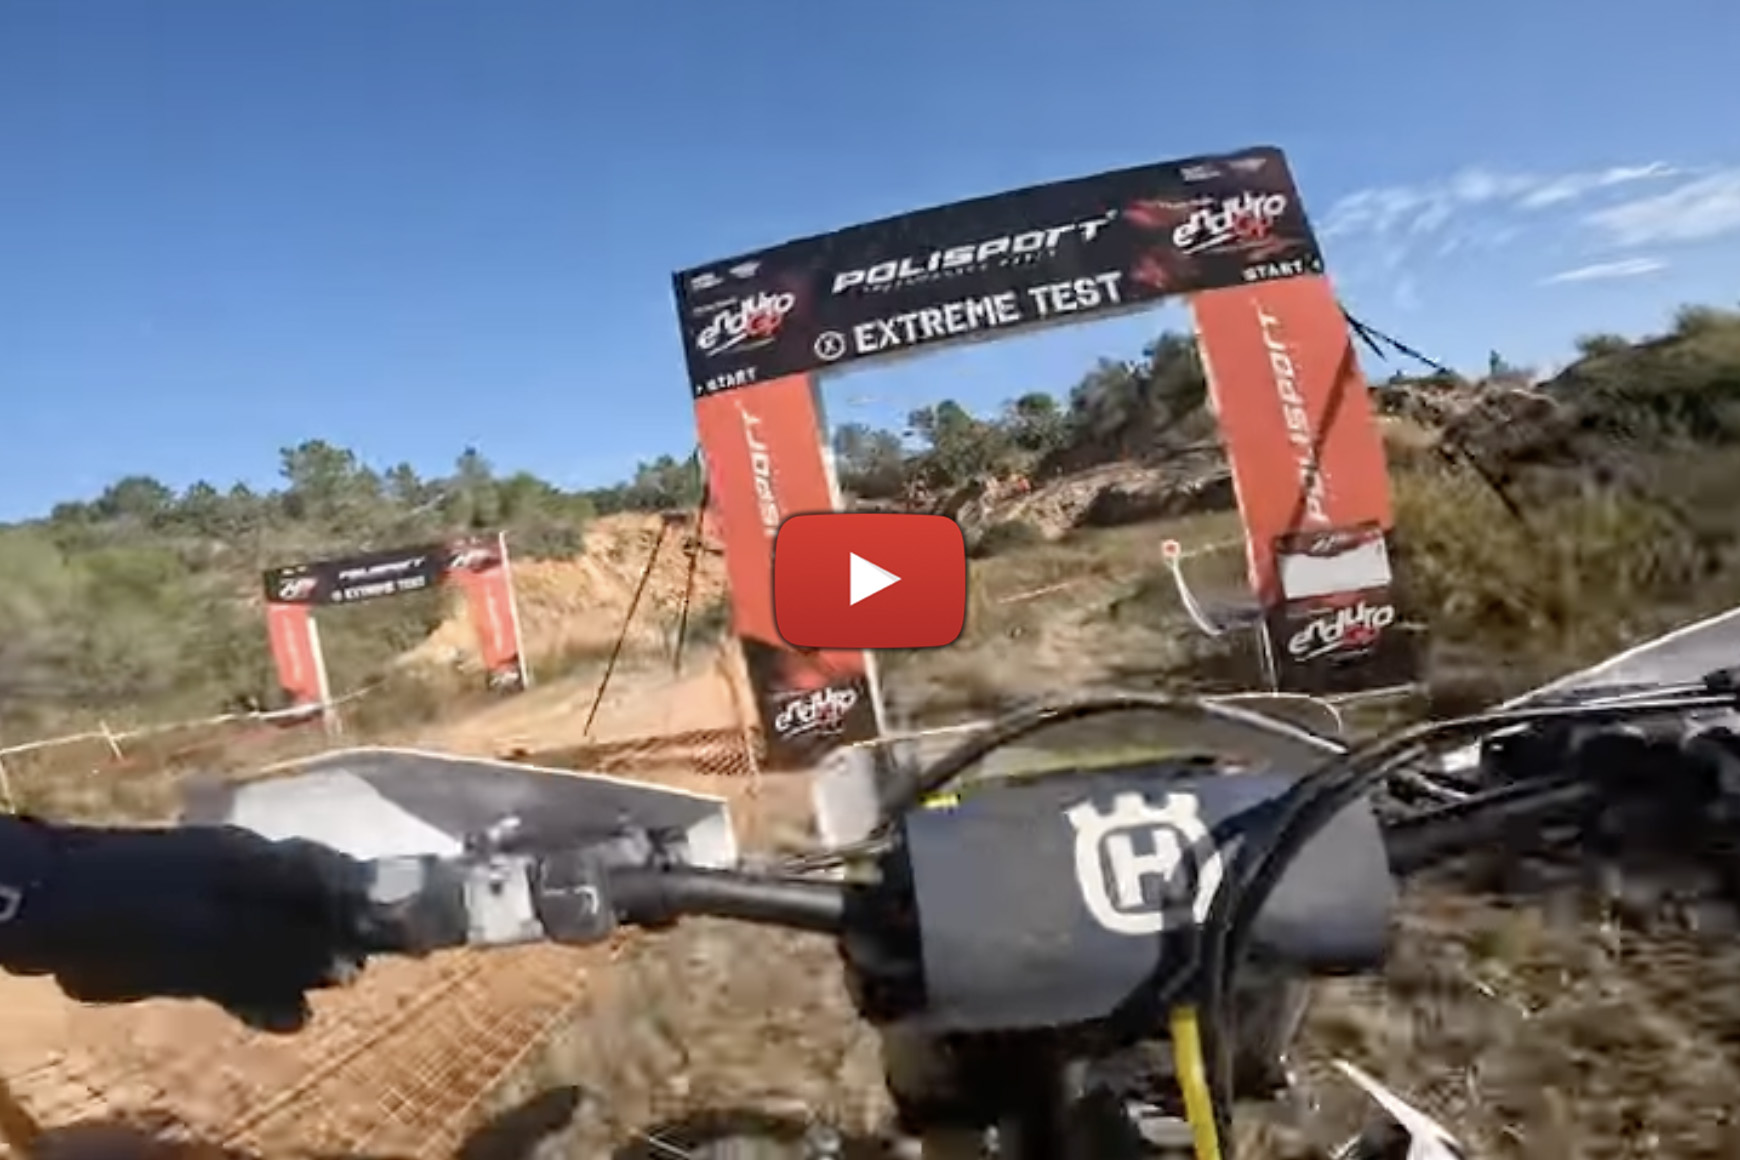 EnduroGP Portugal II: Onboard Track Preview – “mini Erzberg” Extreme test on the cards